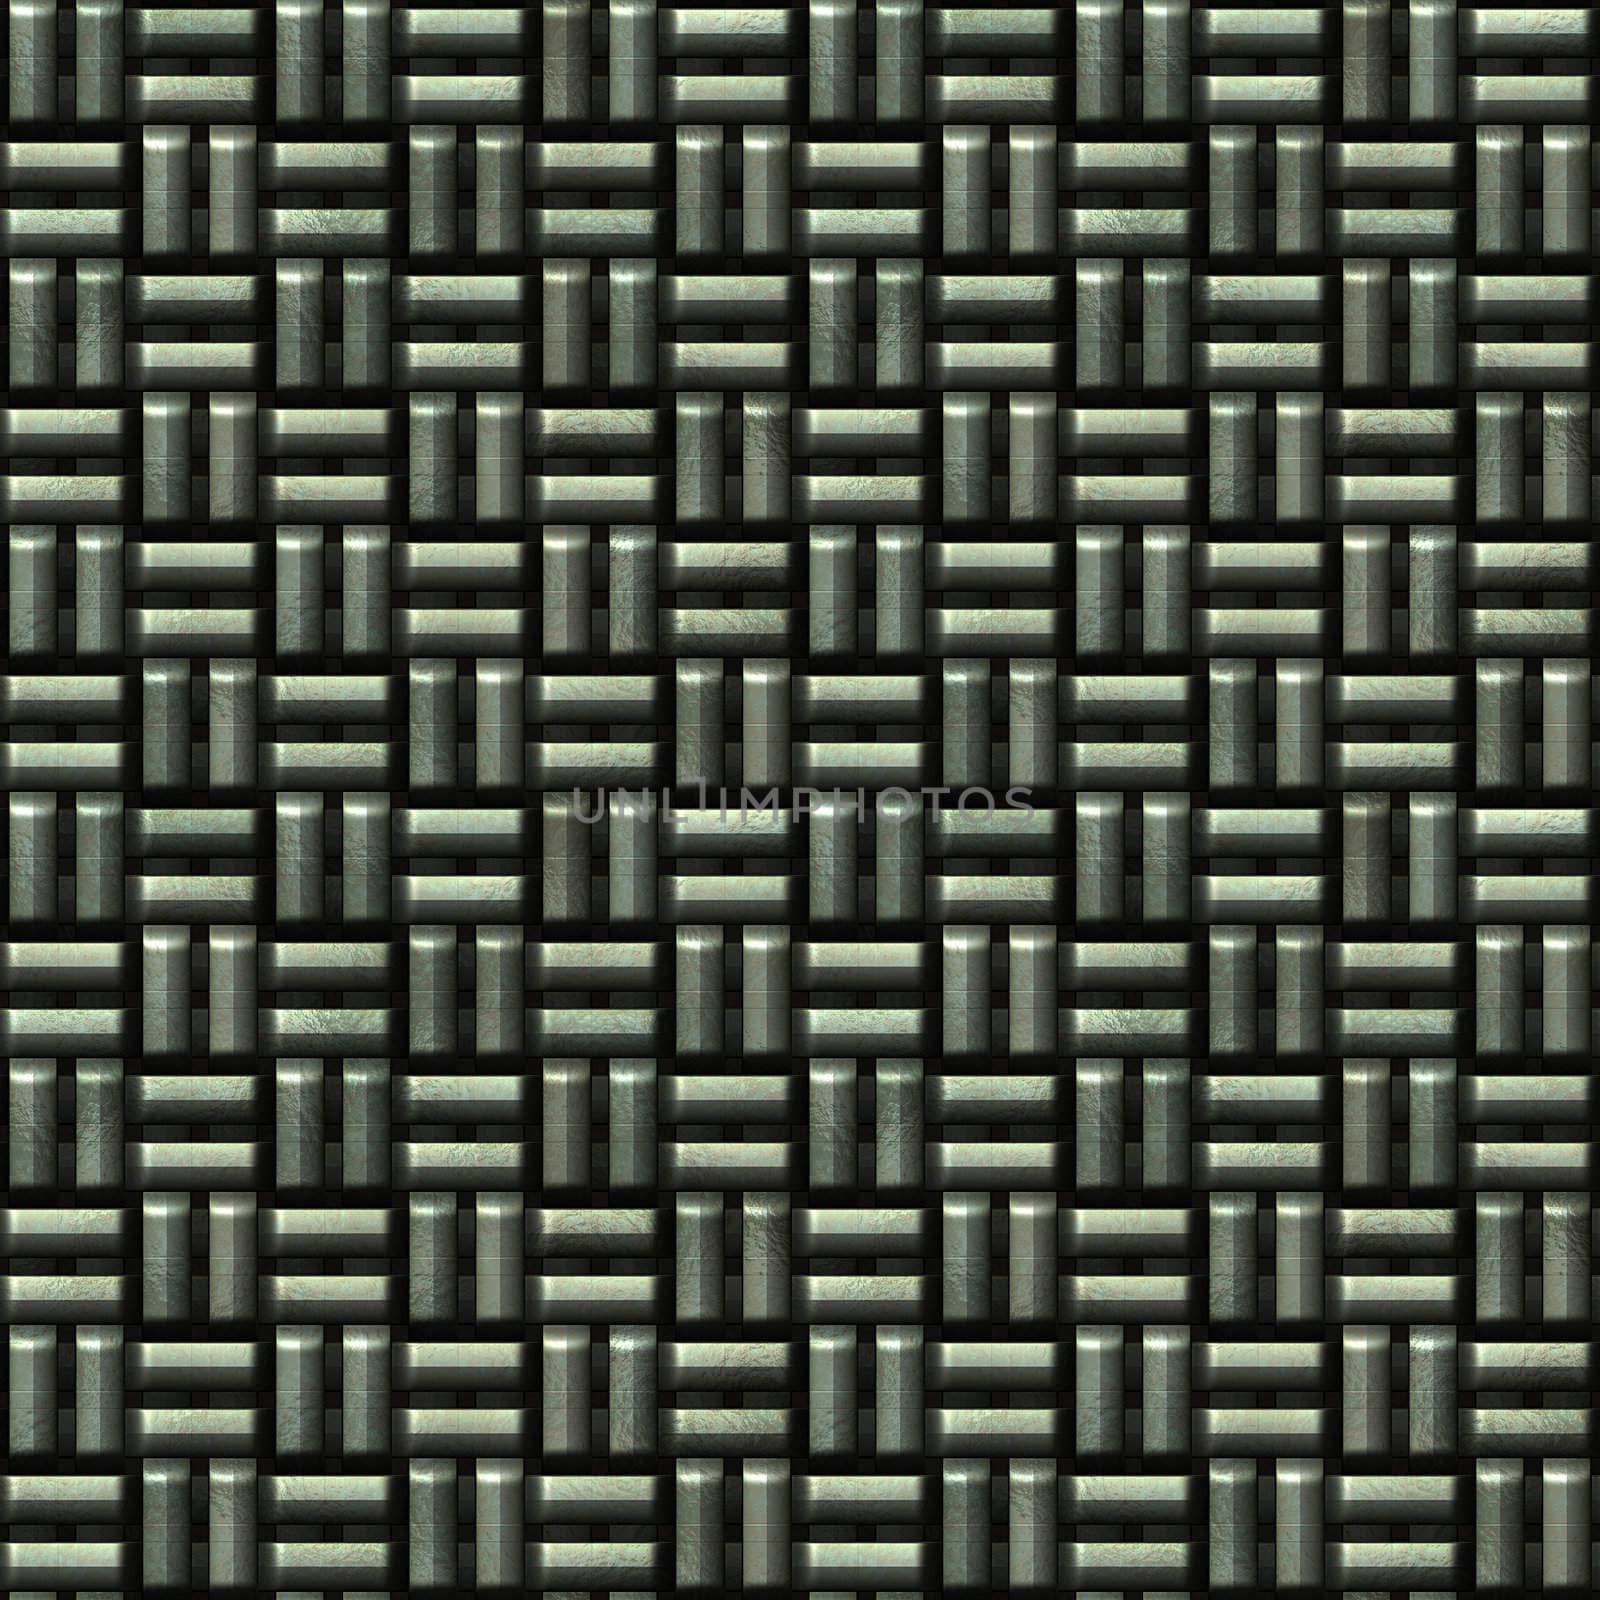 large background image of a woven metal texture